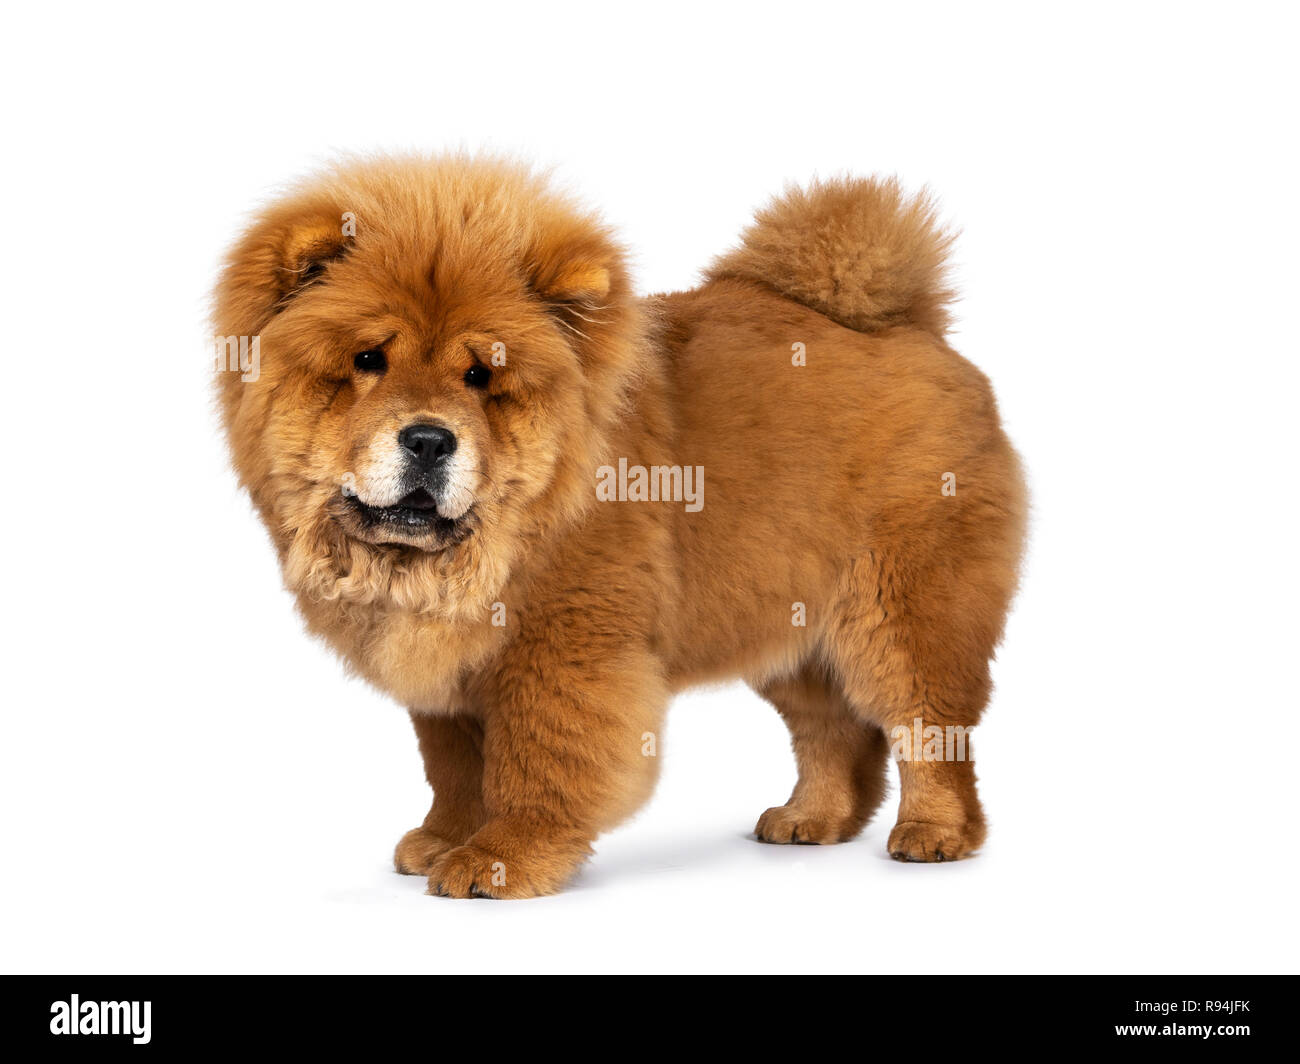 Cute fluffy Chow Chow pup dog, standing side ways looking down. Isolated on a white background Stock Photo